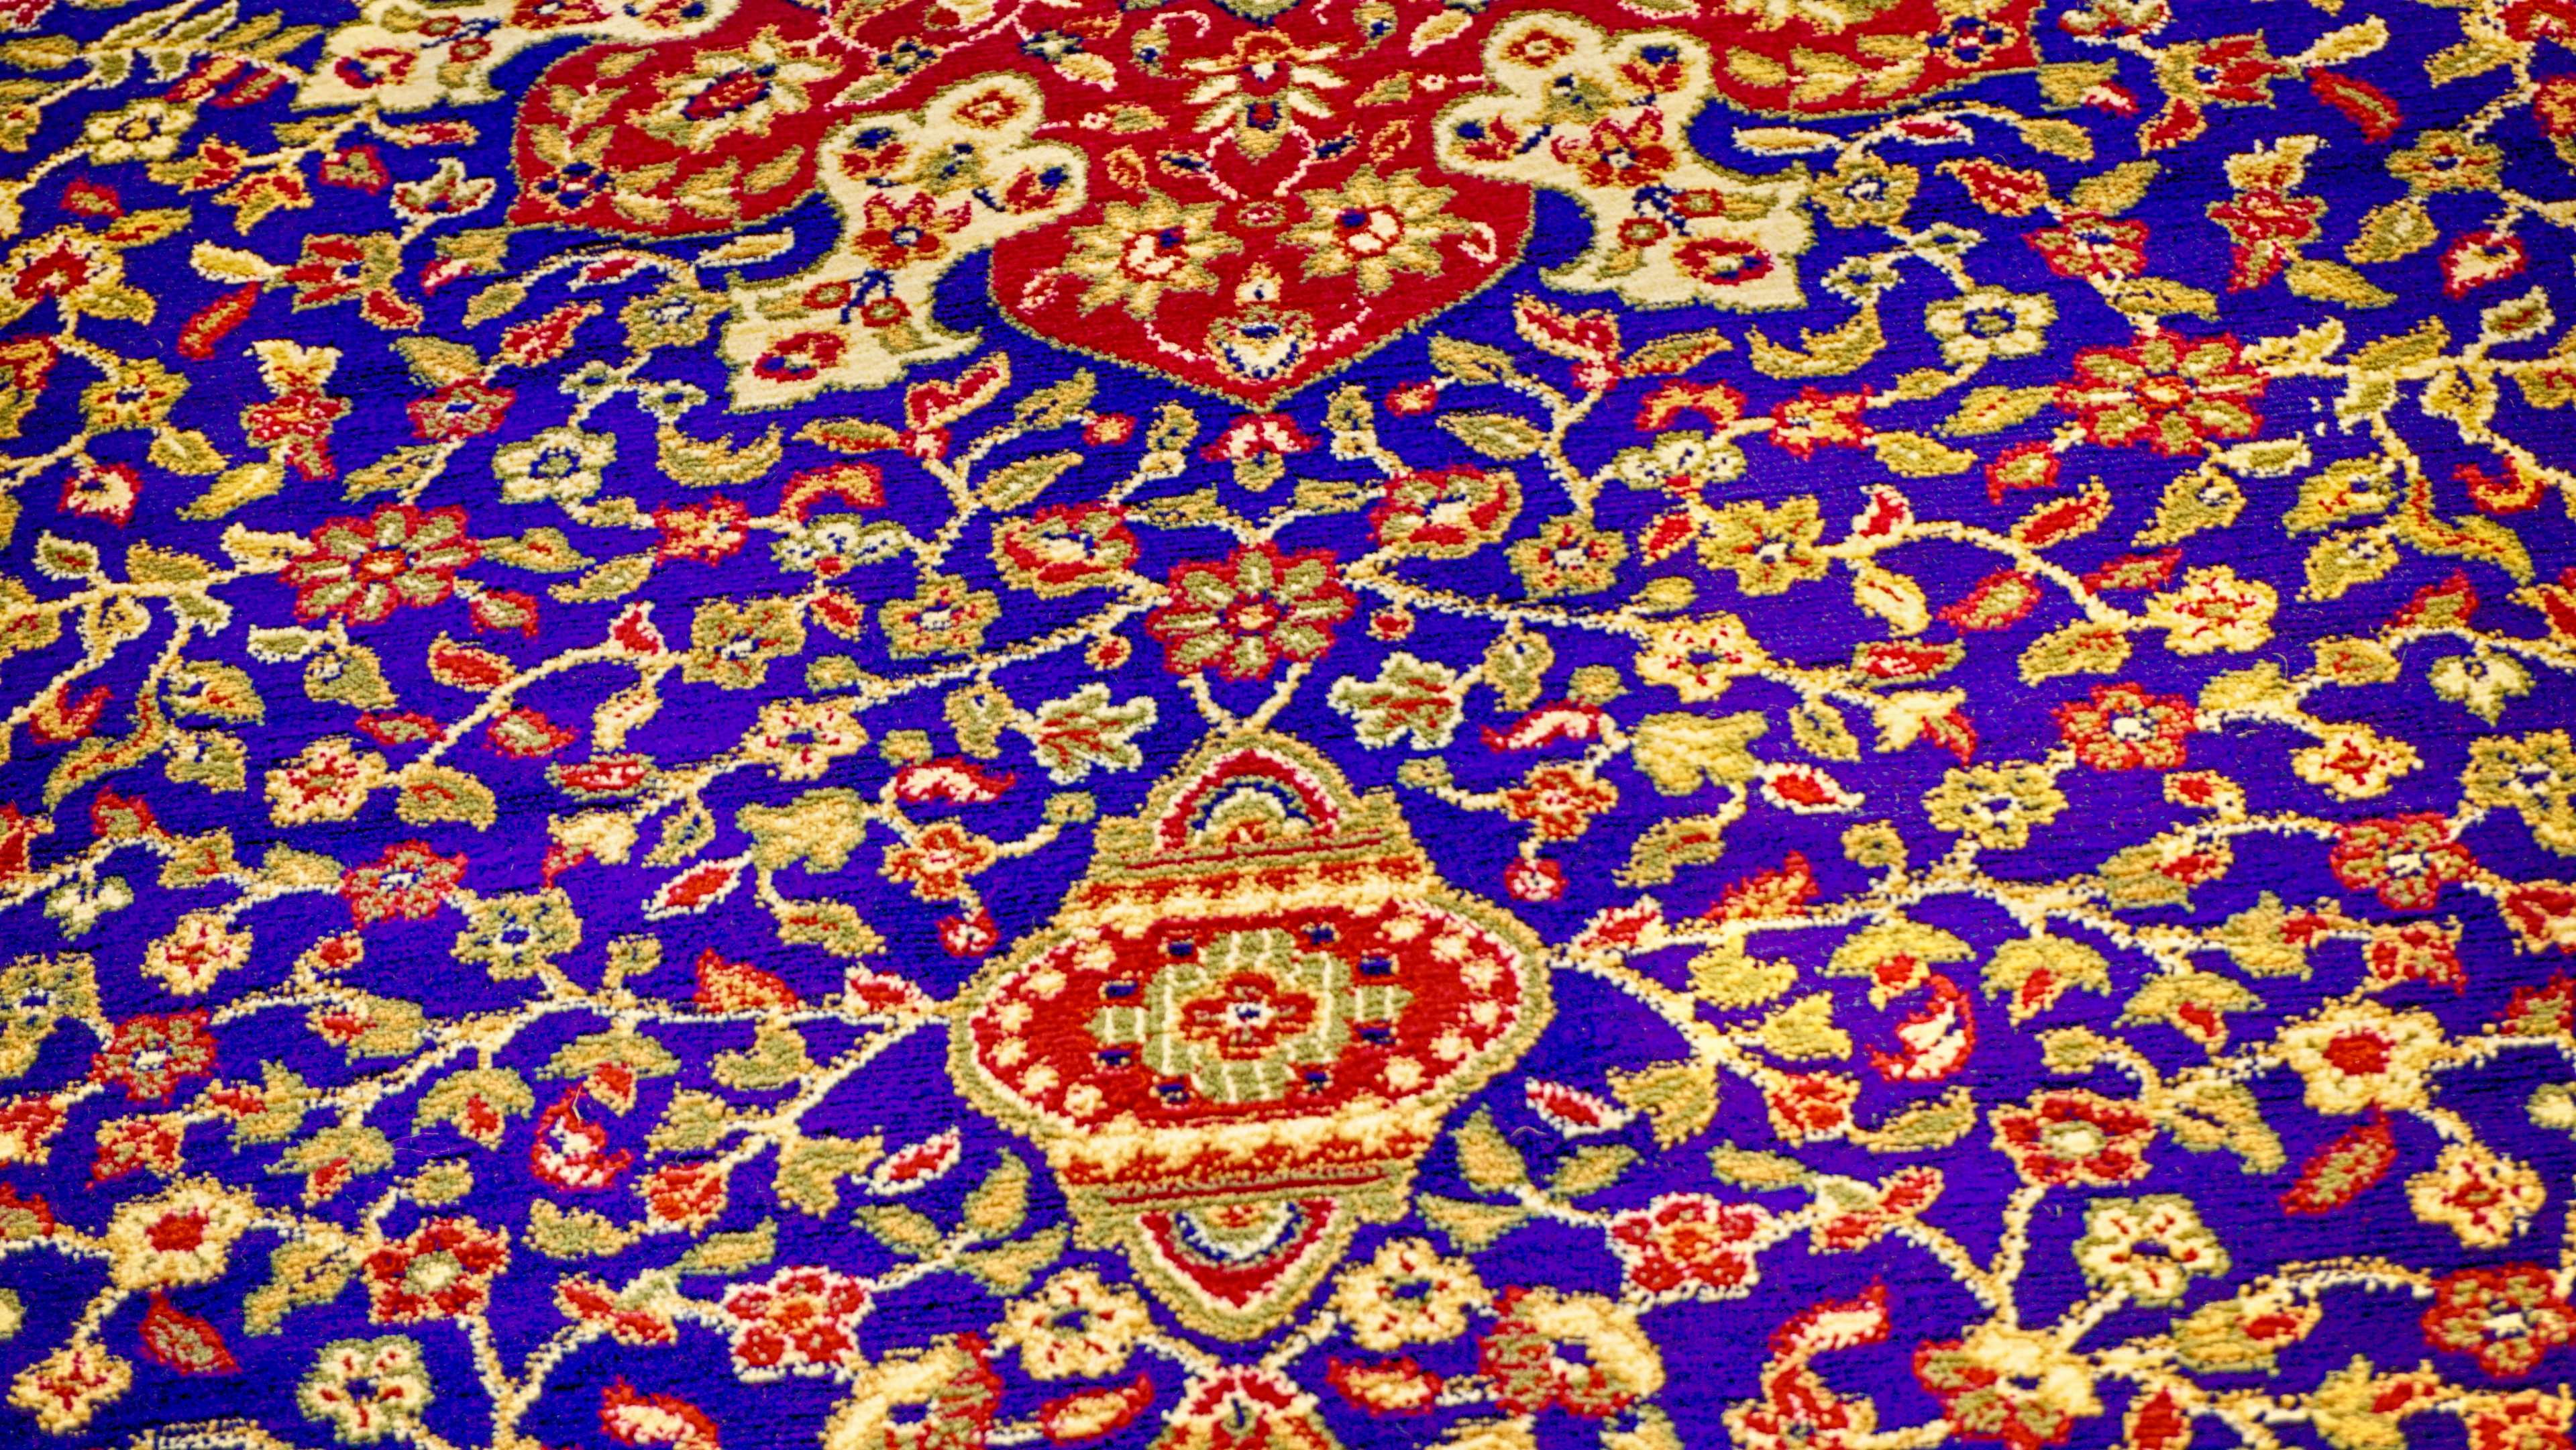 Carpet p k k hd wallpapers backgrounds free download rare gallery